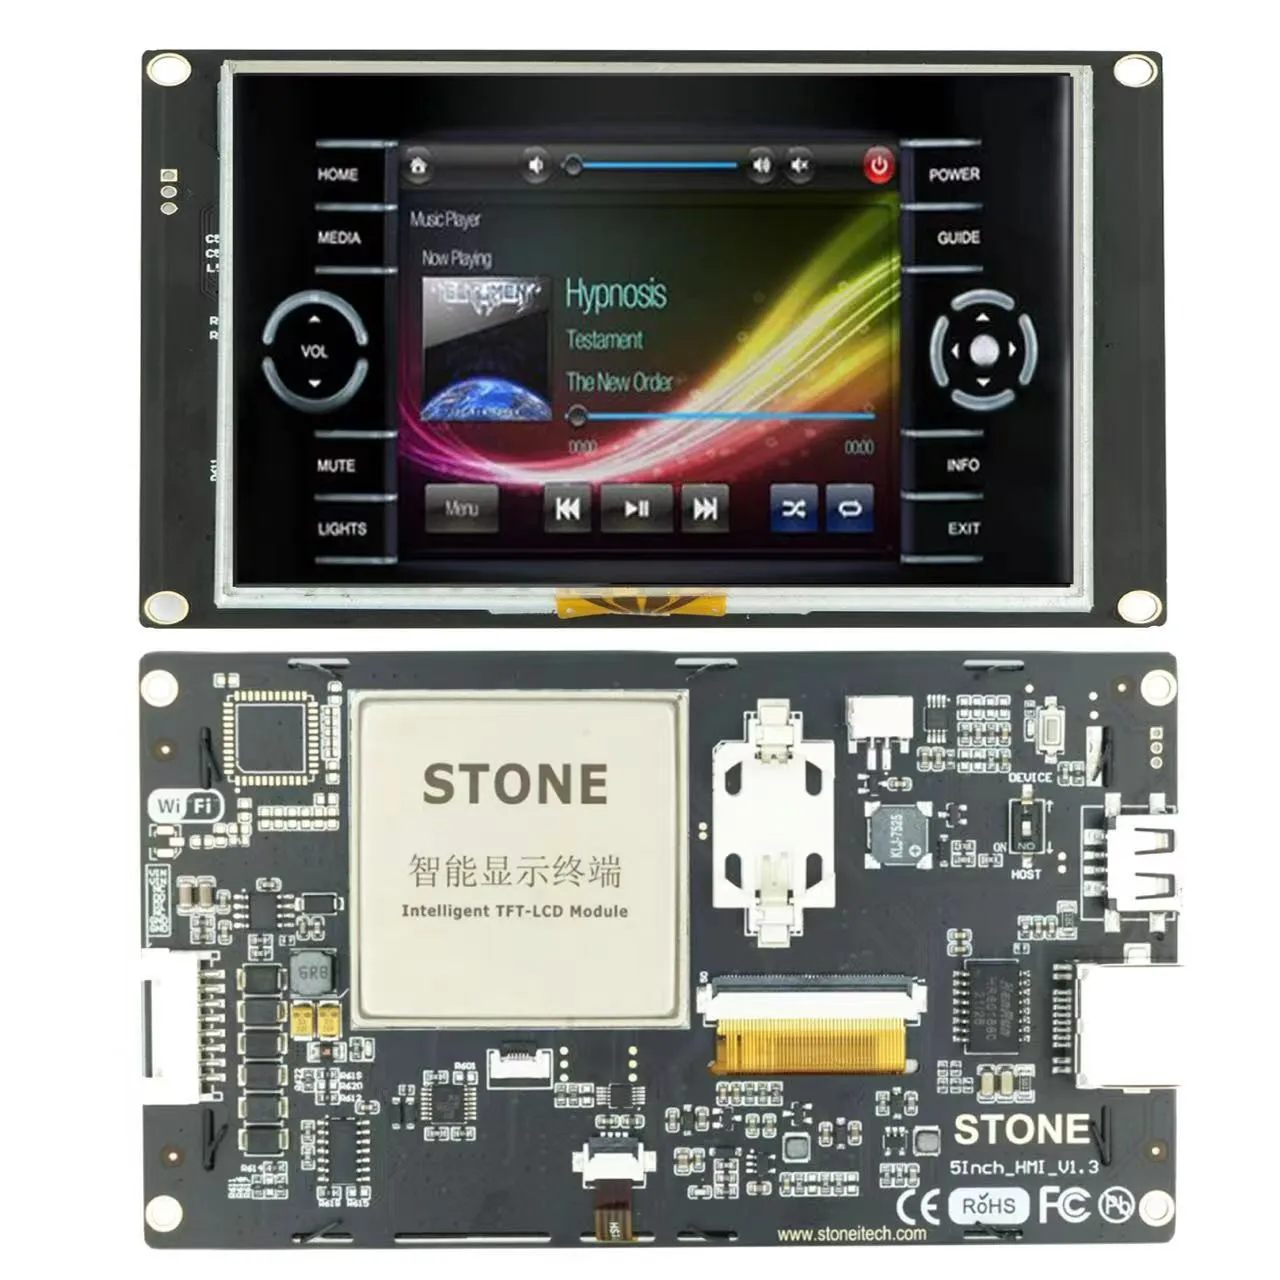 LCD Display 5inch industrial class 800×480 TFT LCD monitor & 4-wire resistance touch panel, 256MB of flash memory for HMI